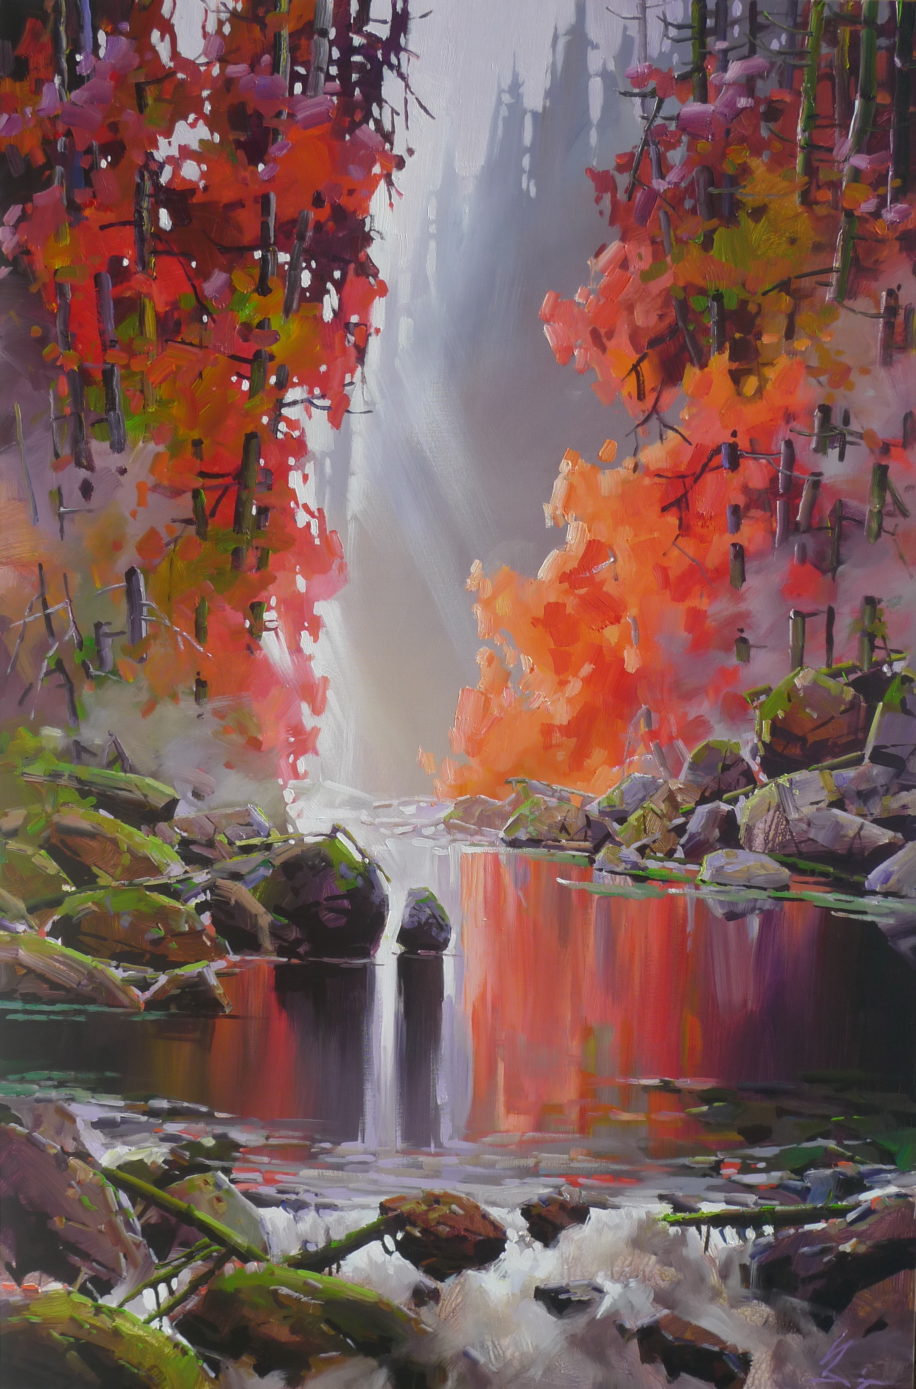 Red Season by Bi Yuan Cheng at The Avenue Gallery, a contemporary fine art gallery in Victoria, BC, Canada.